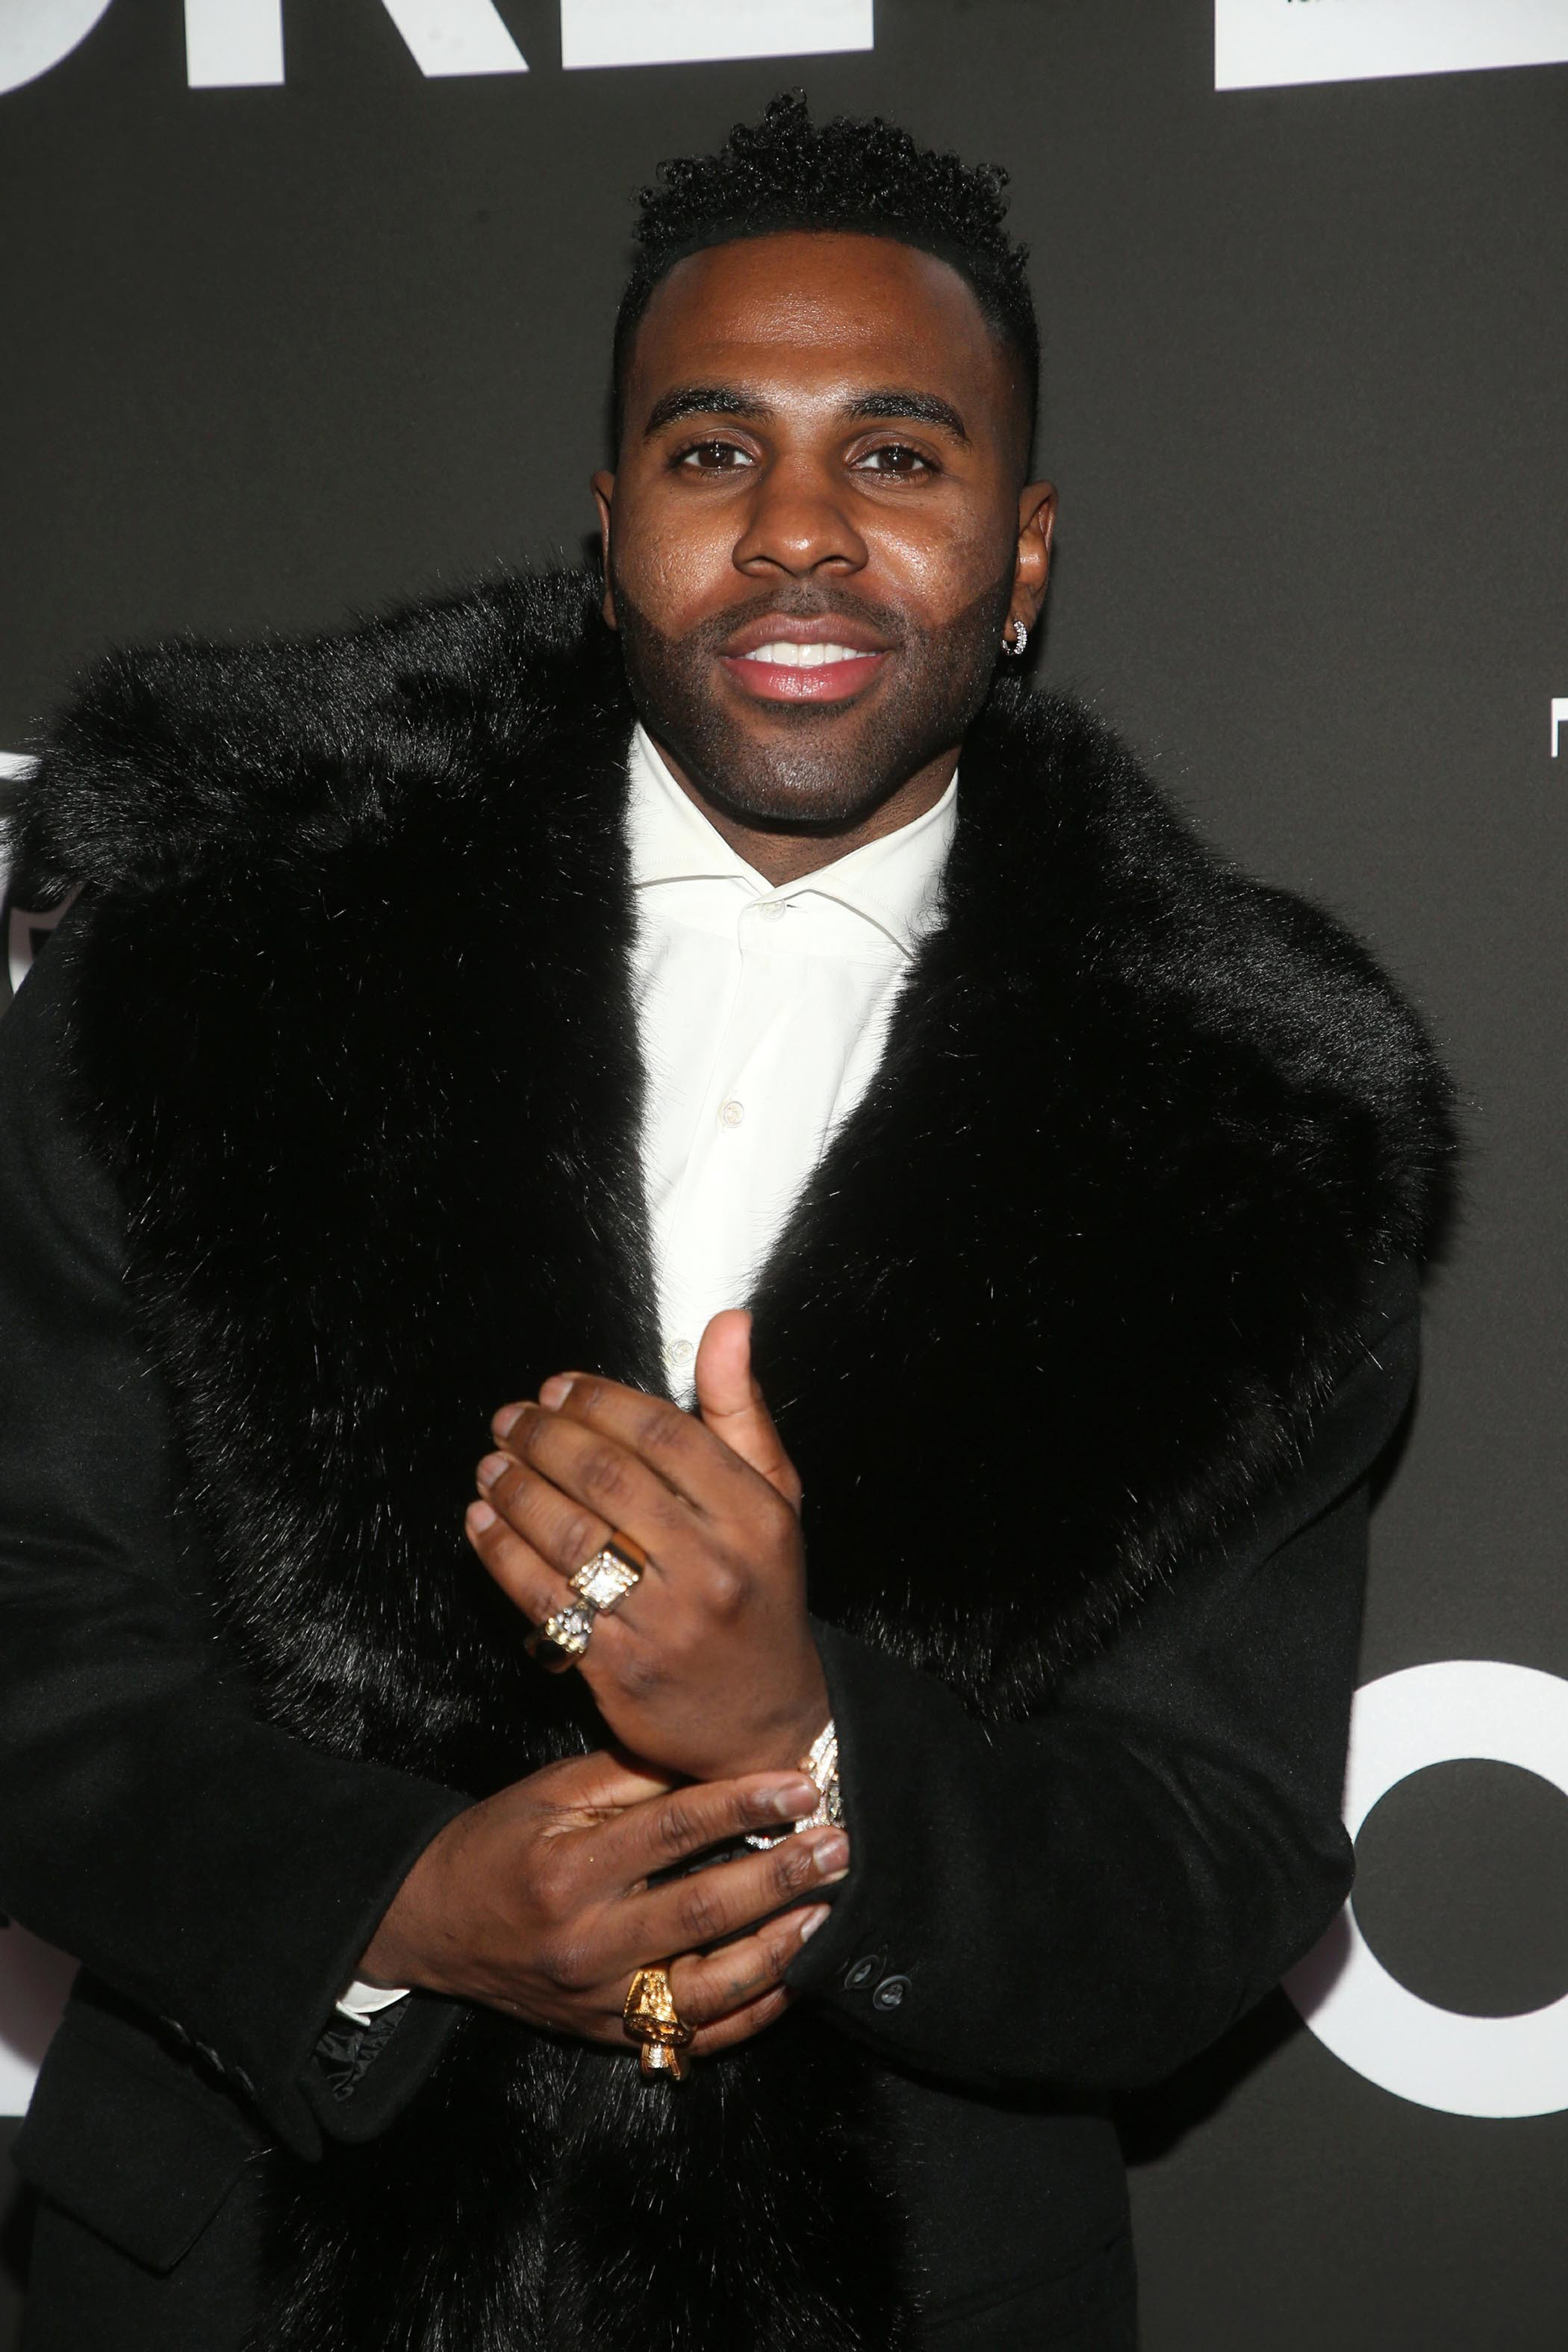 Jason Derulo Sued For Sexual Harassment